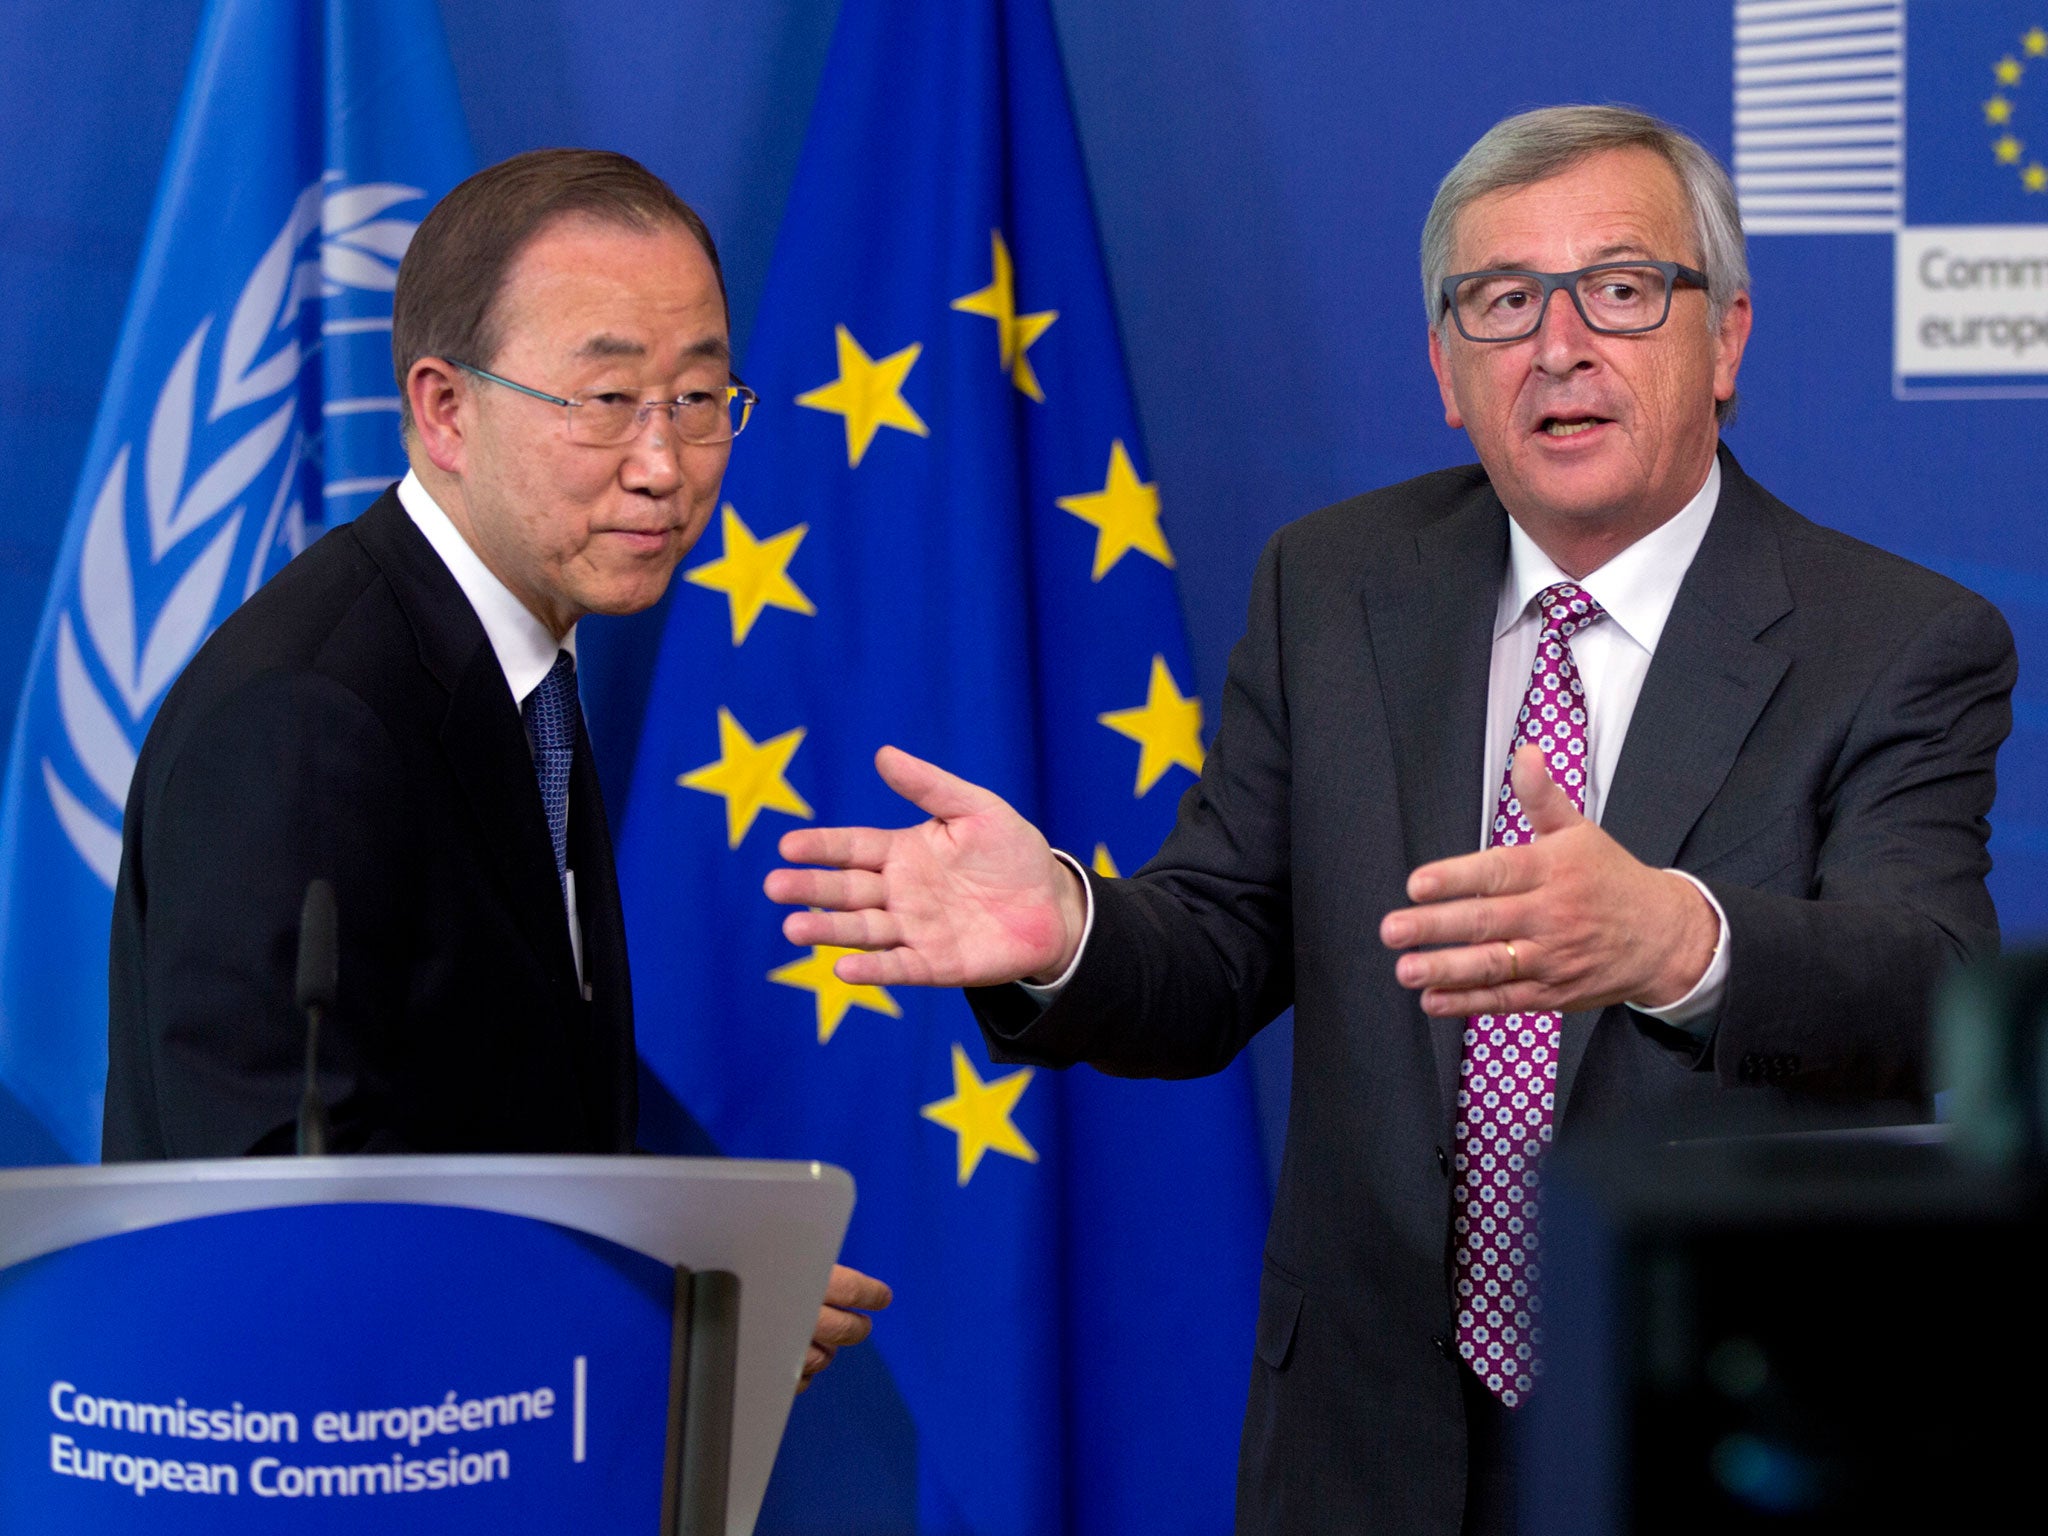 United Nations Secretary-General Ban Ki-moon, left, and European Commission President Jean-Claude Juncker participate in a media conference at EU headquarters in Brussels. Ban Ki-moon called for international solidarity to deal with the issue of tens of t